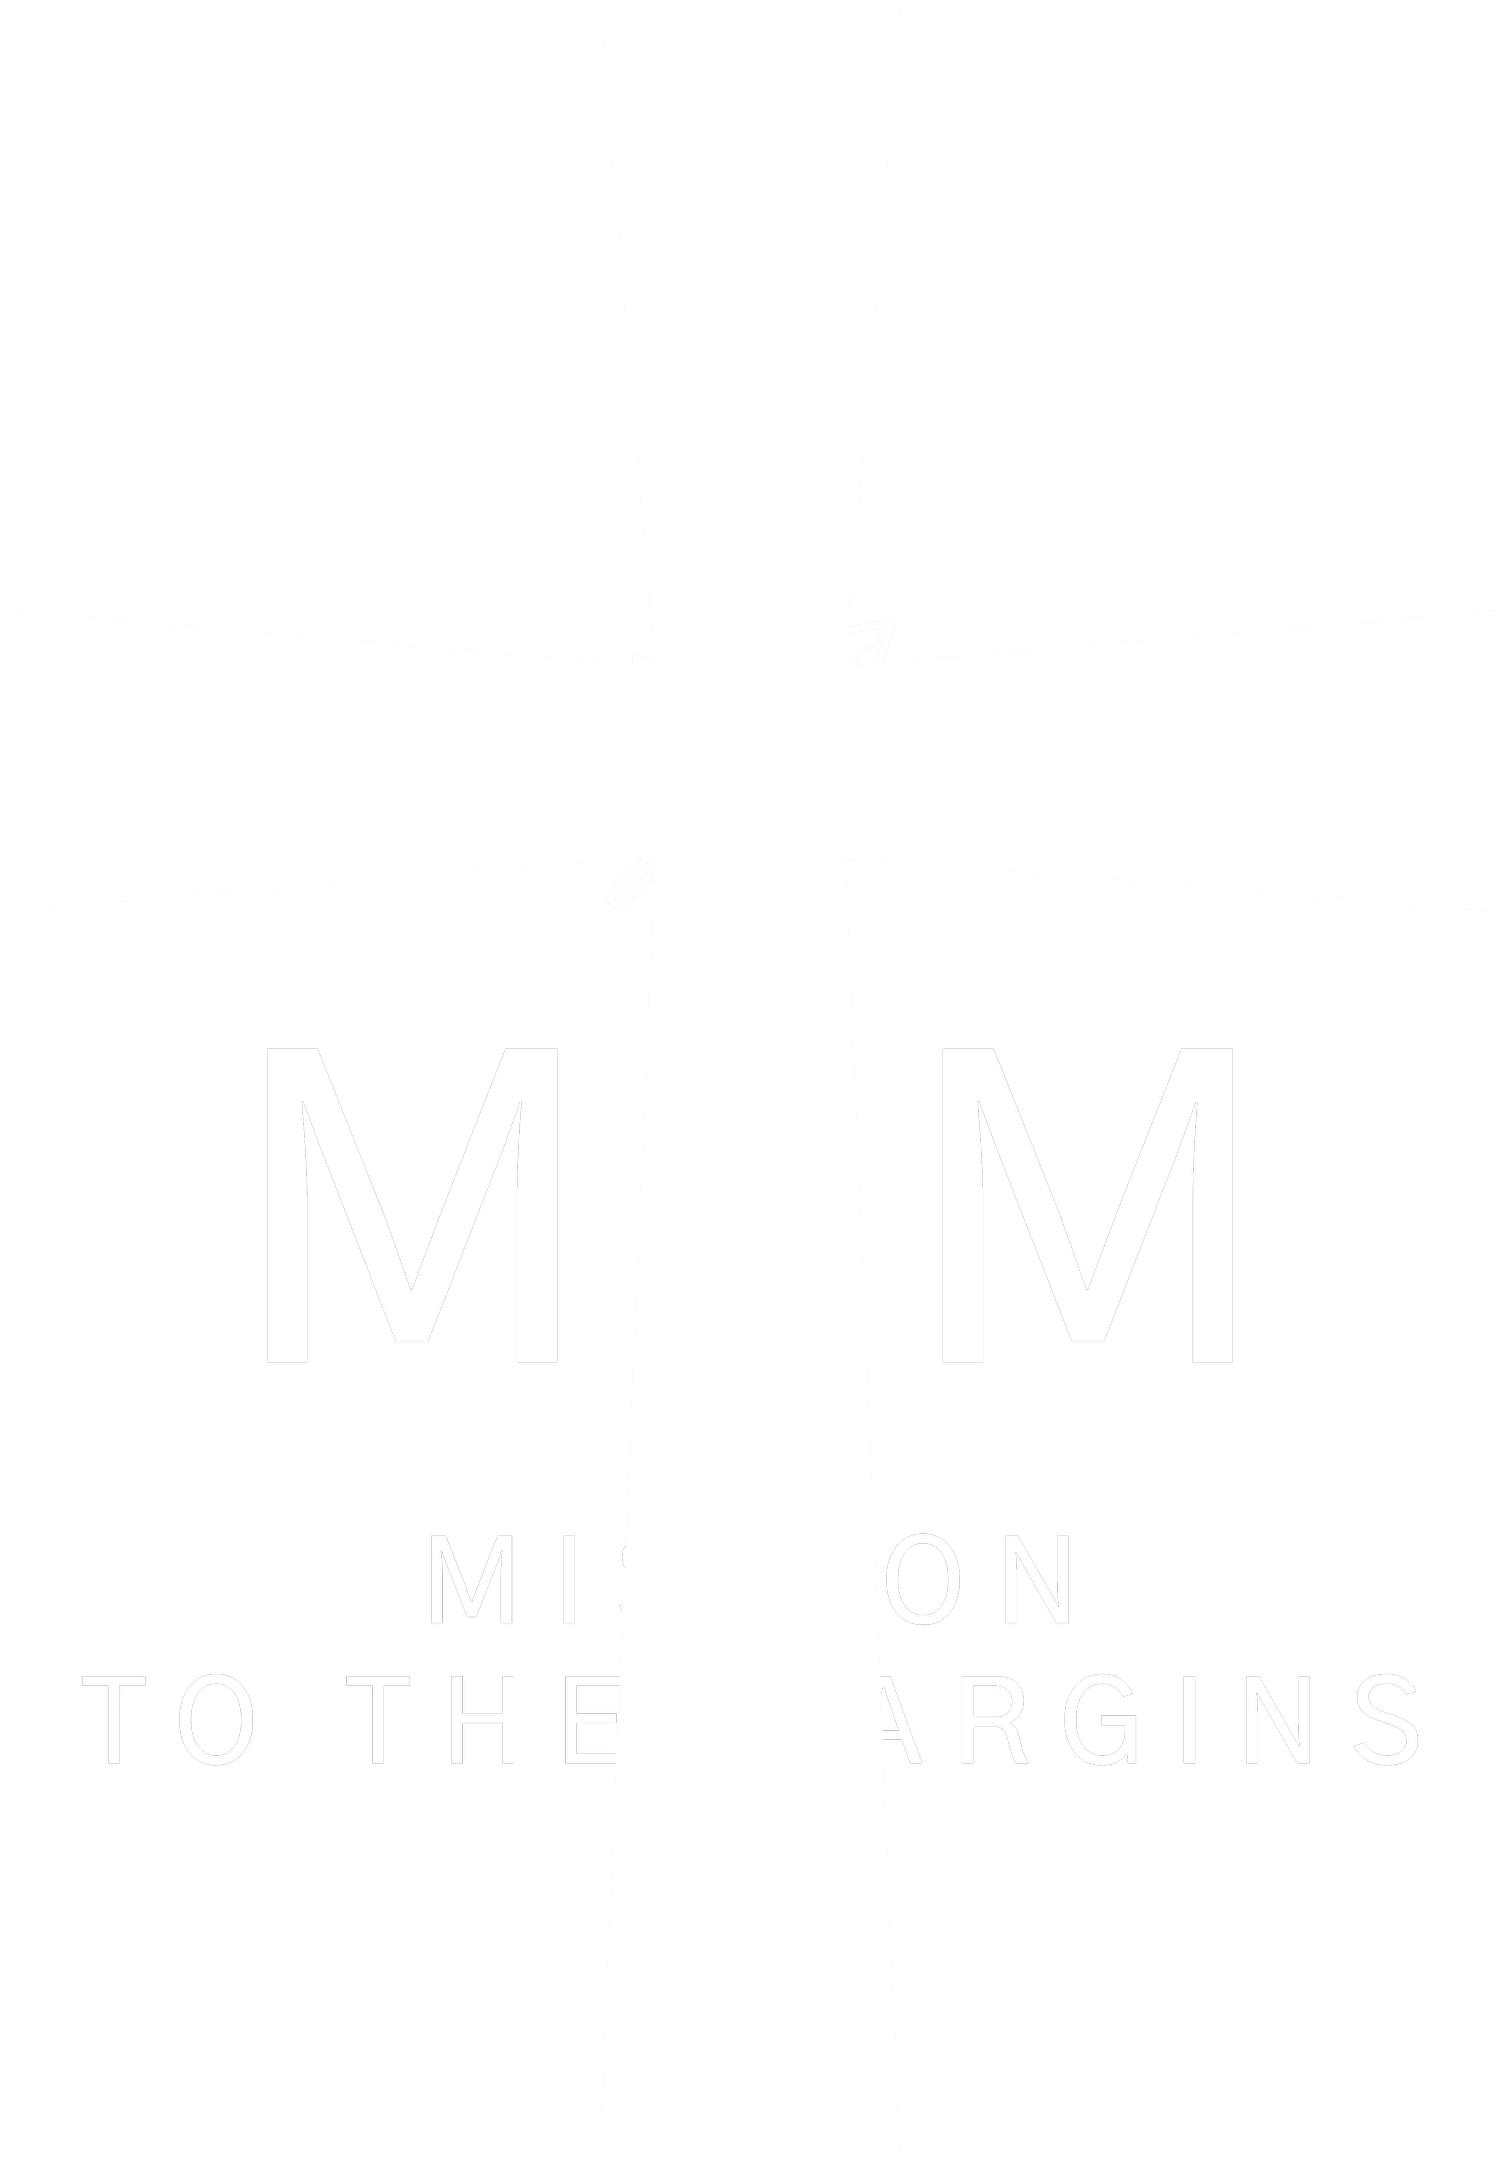 Mission to the Margins